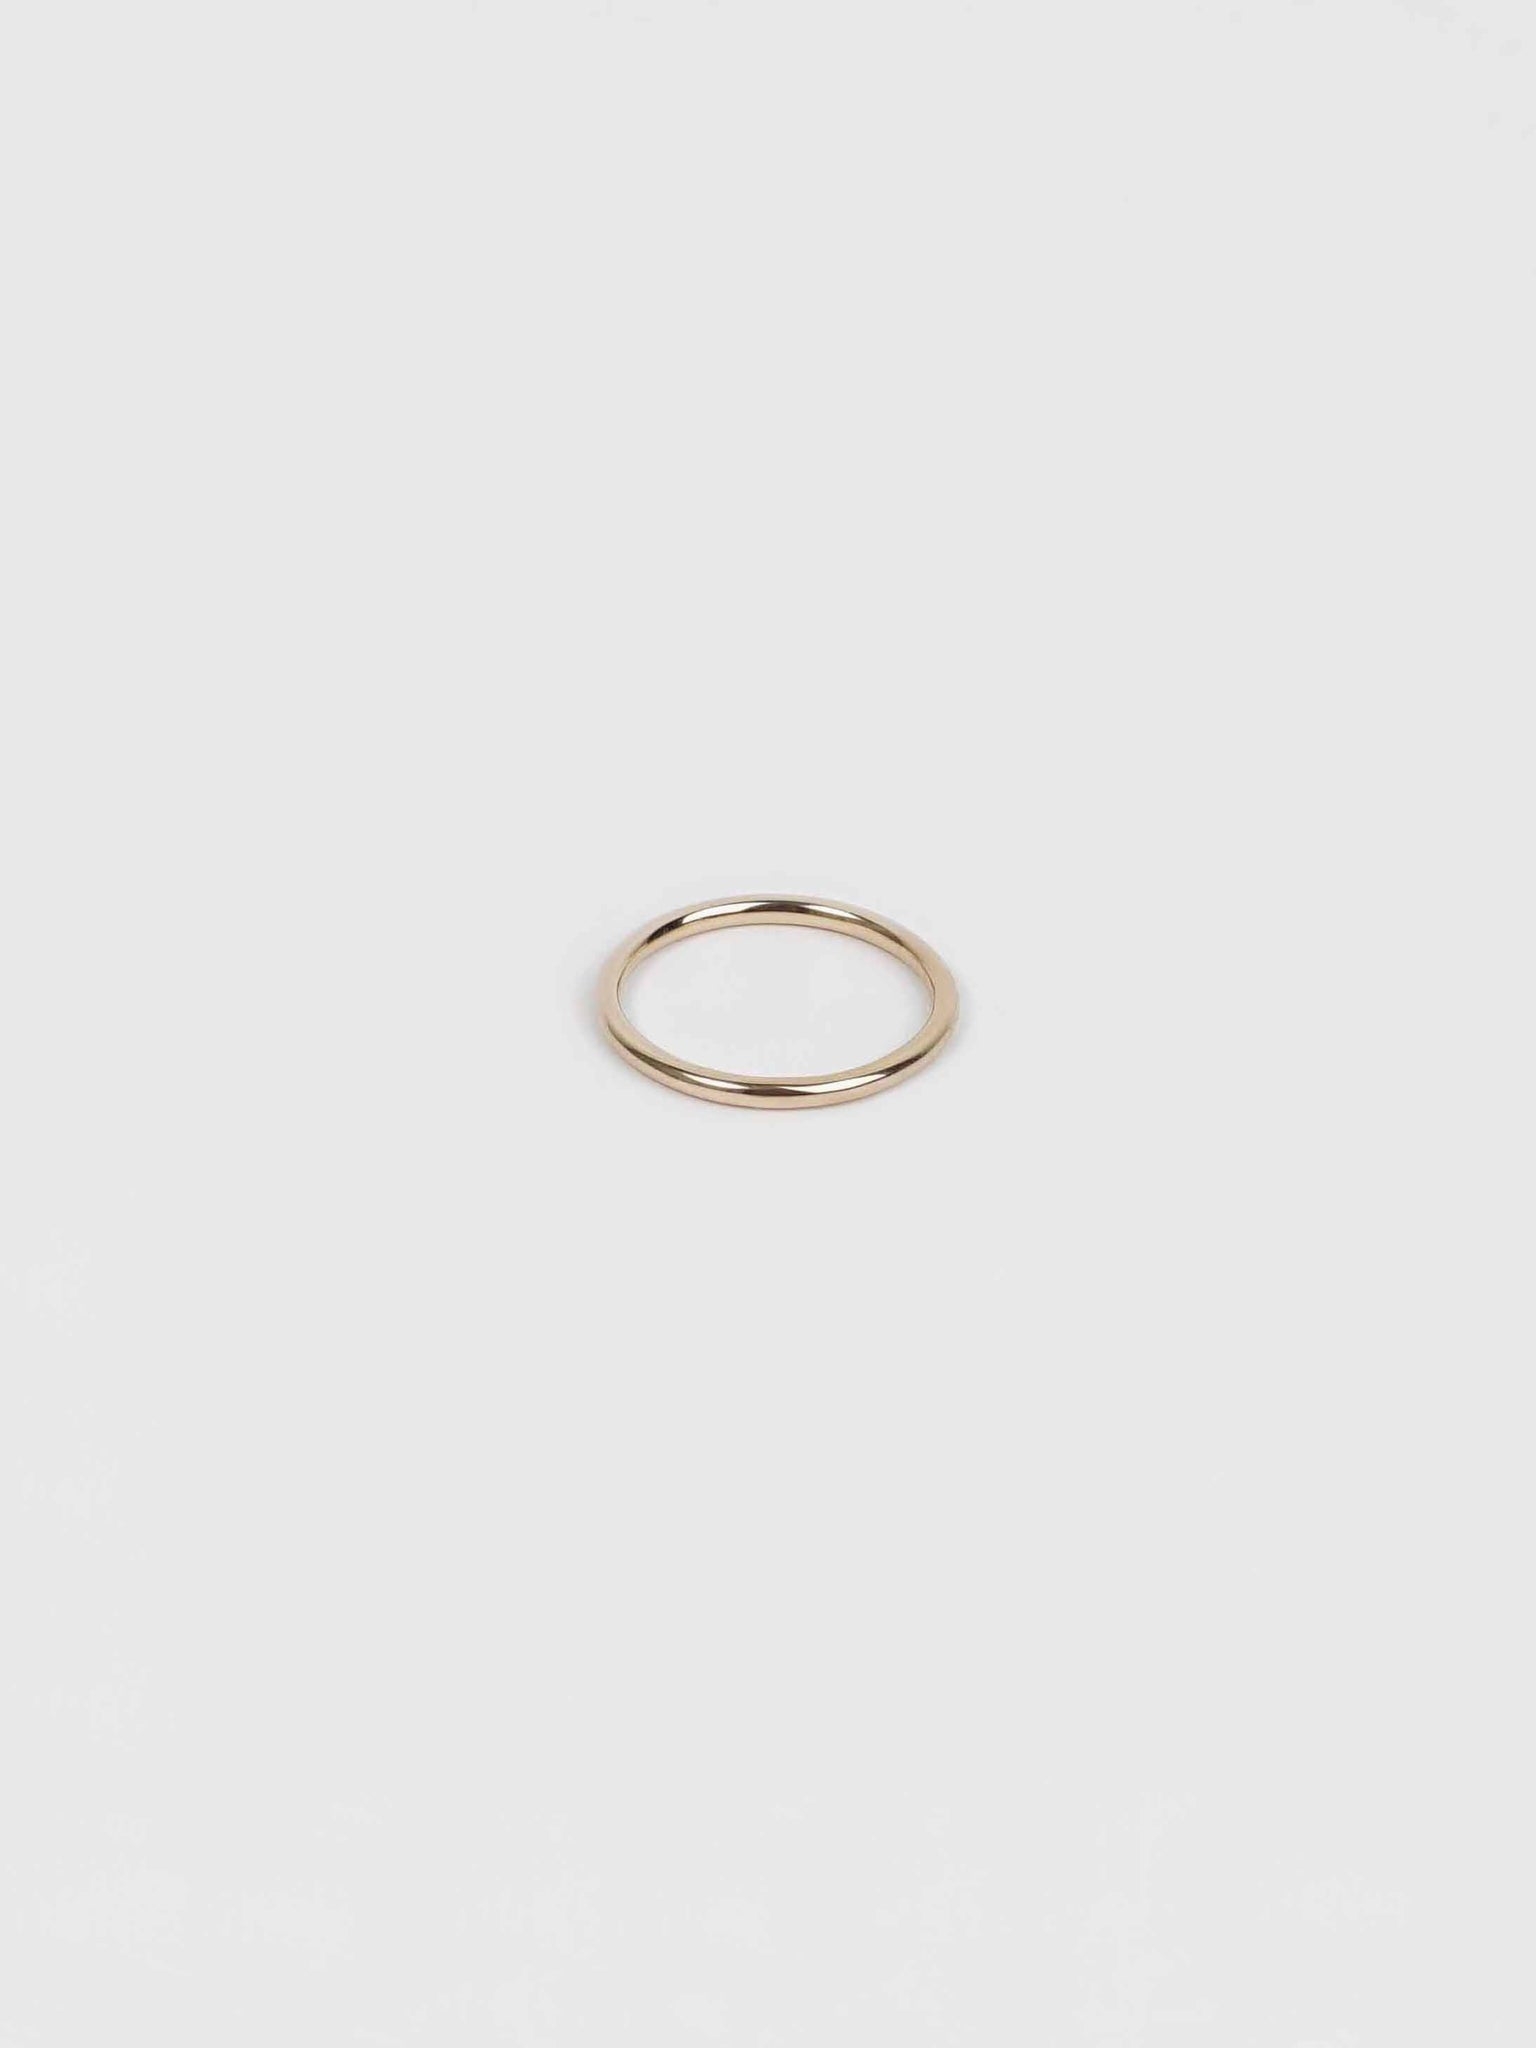 SUPERFINE FORM RING